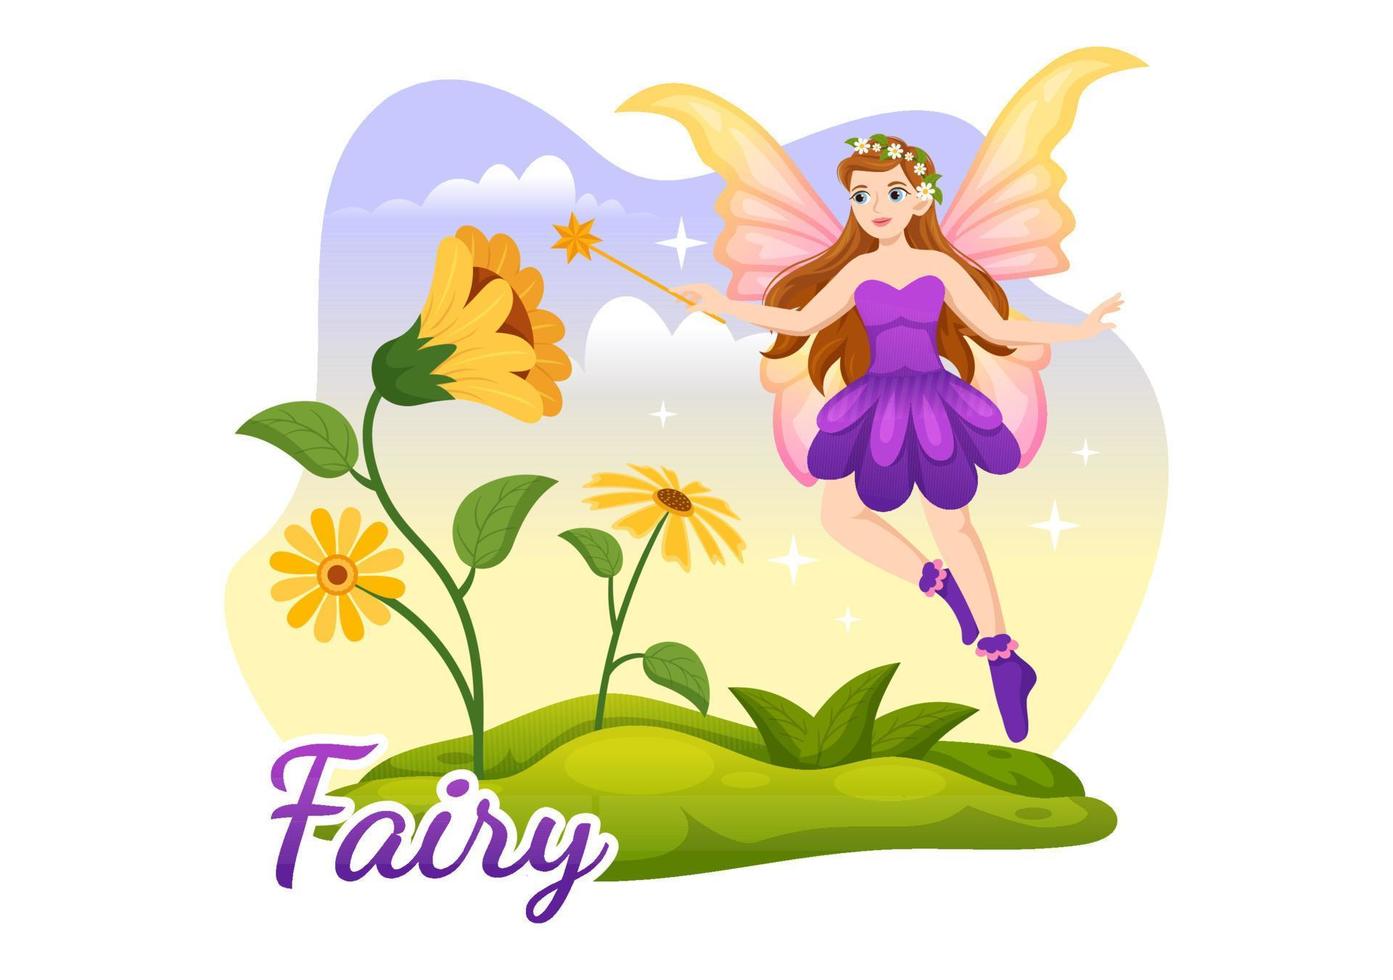 Beautiful Flying Fairy Illustration with Elf, Landscape Tree and Green Grass in Flat Cartoon Hand Drawn for Web Banner or Landing Page Templates vector